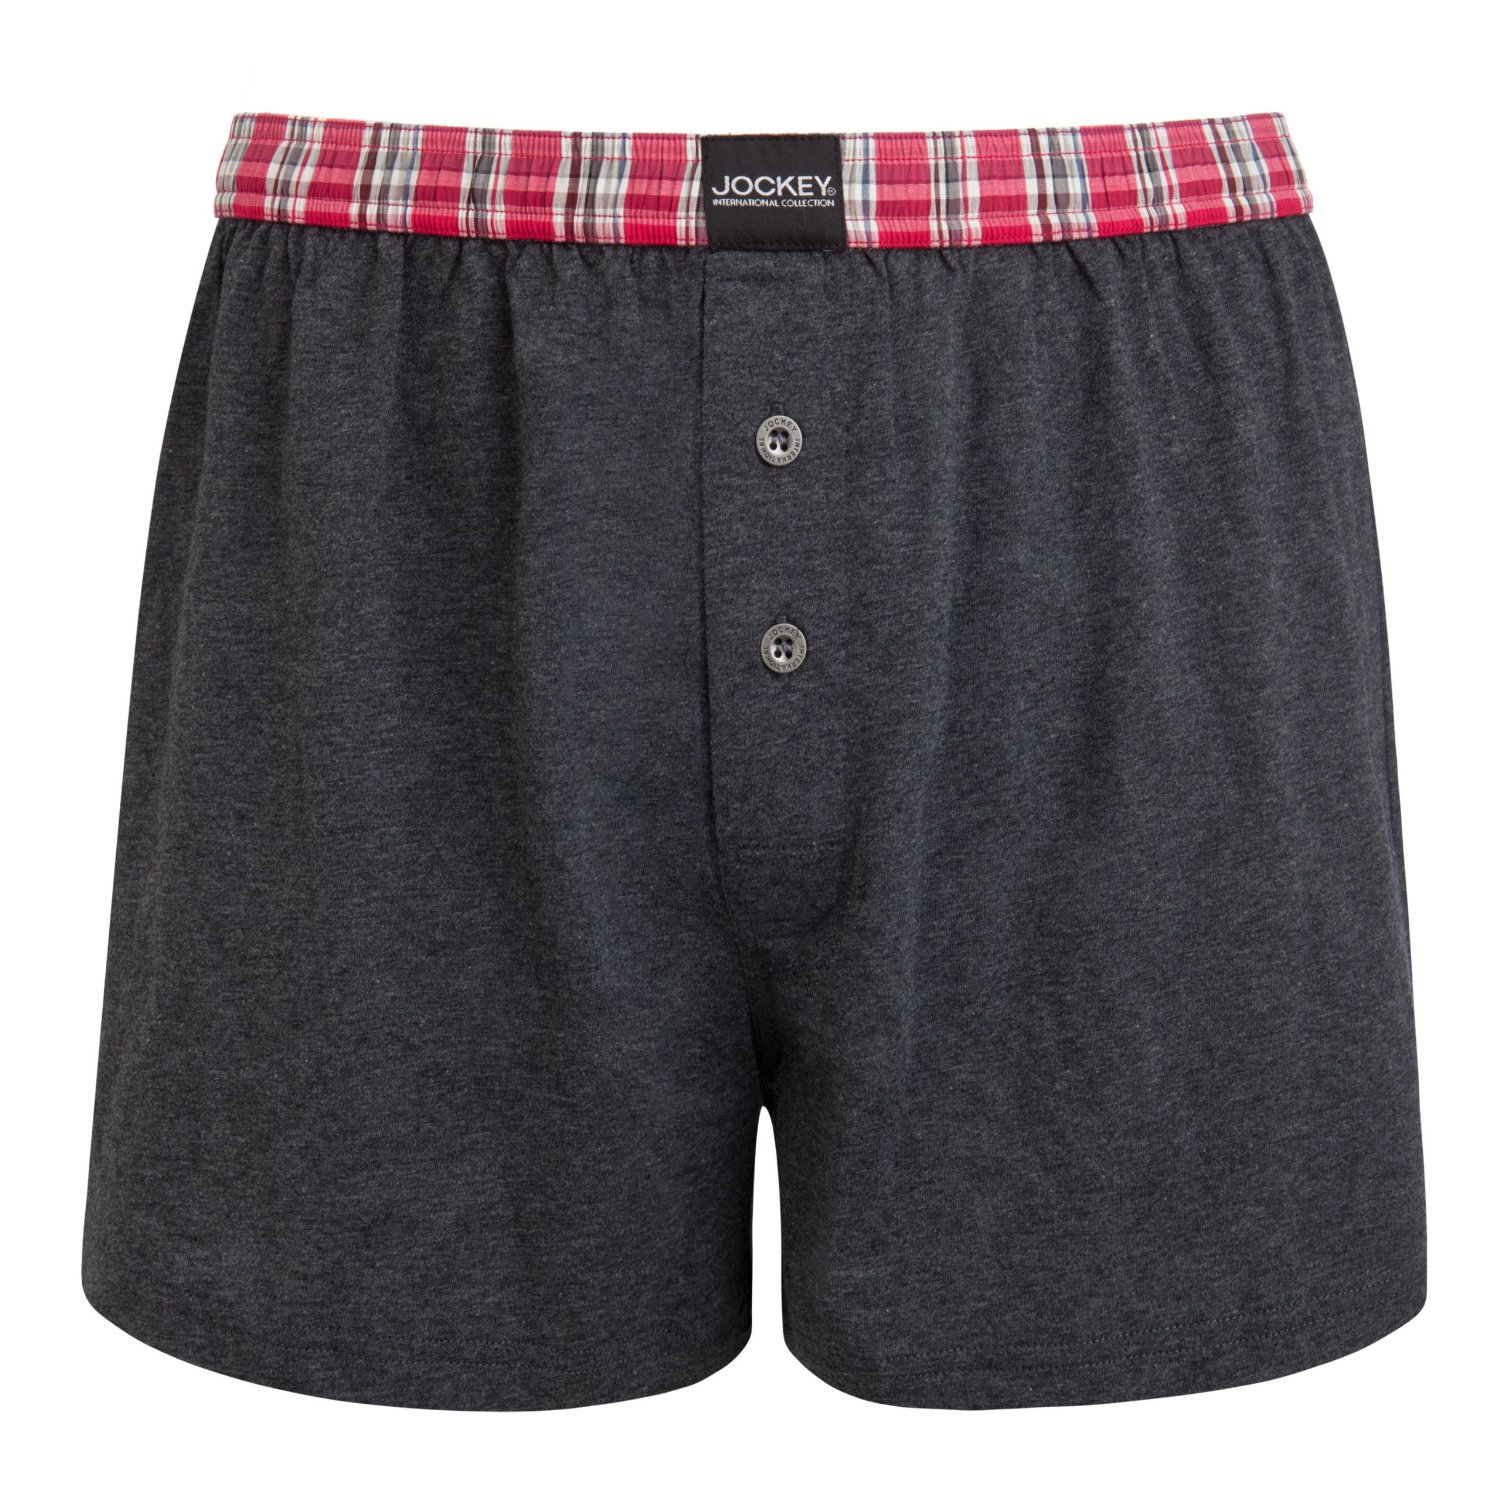 Jockey Knit Boxer Short with Button Fly